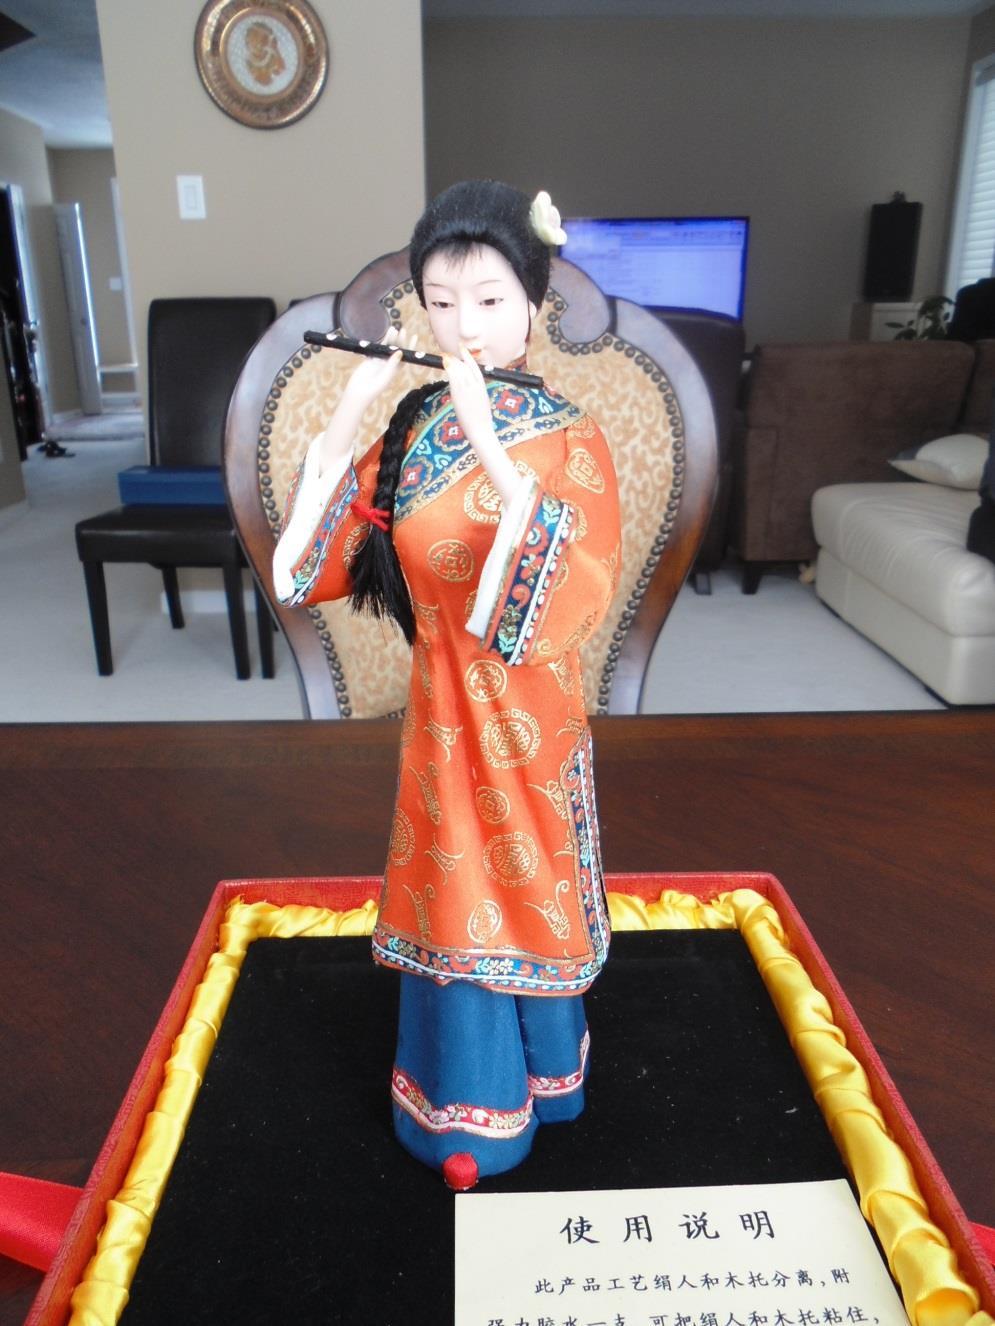 #27 Figurine This is stunning figurine of a beautiful Qing dynasty lady playing the